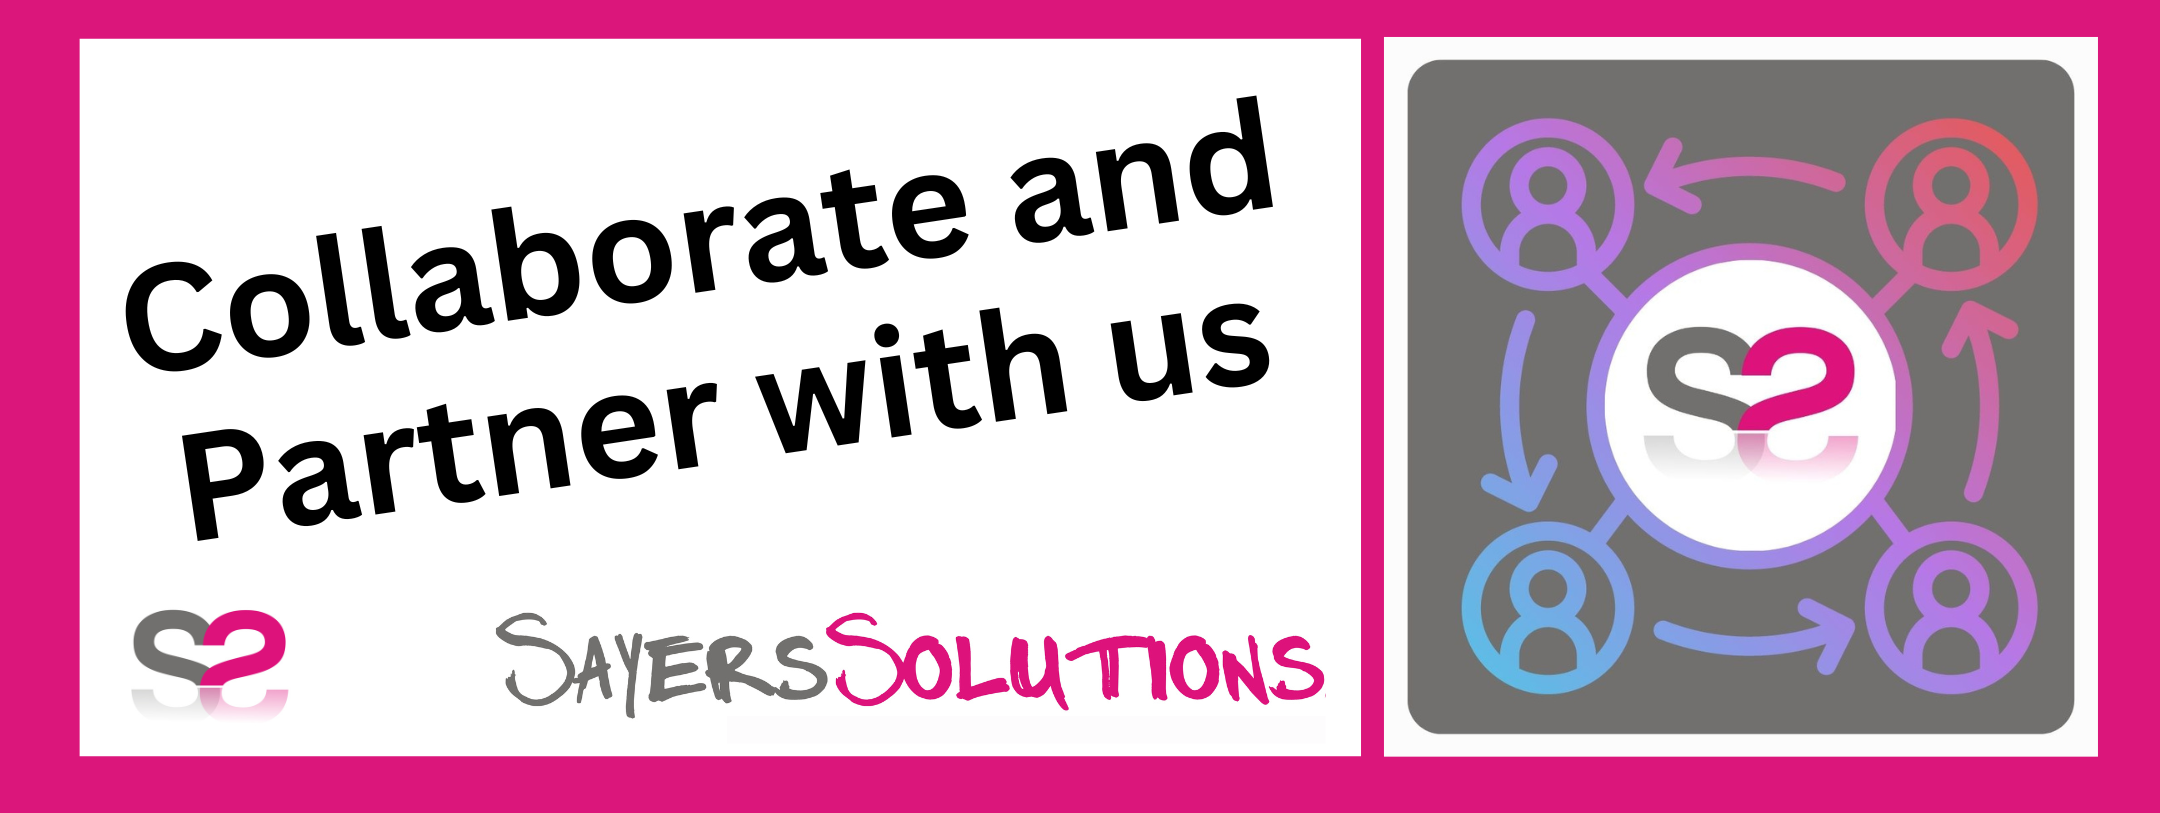 Collaborate and Partner with us